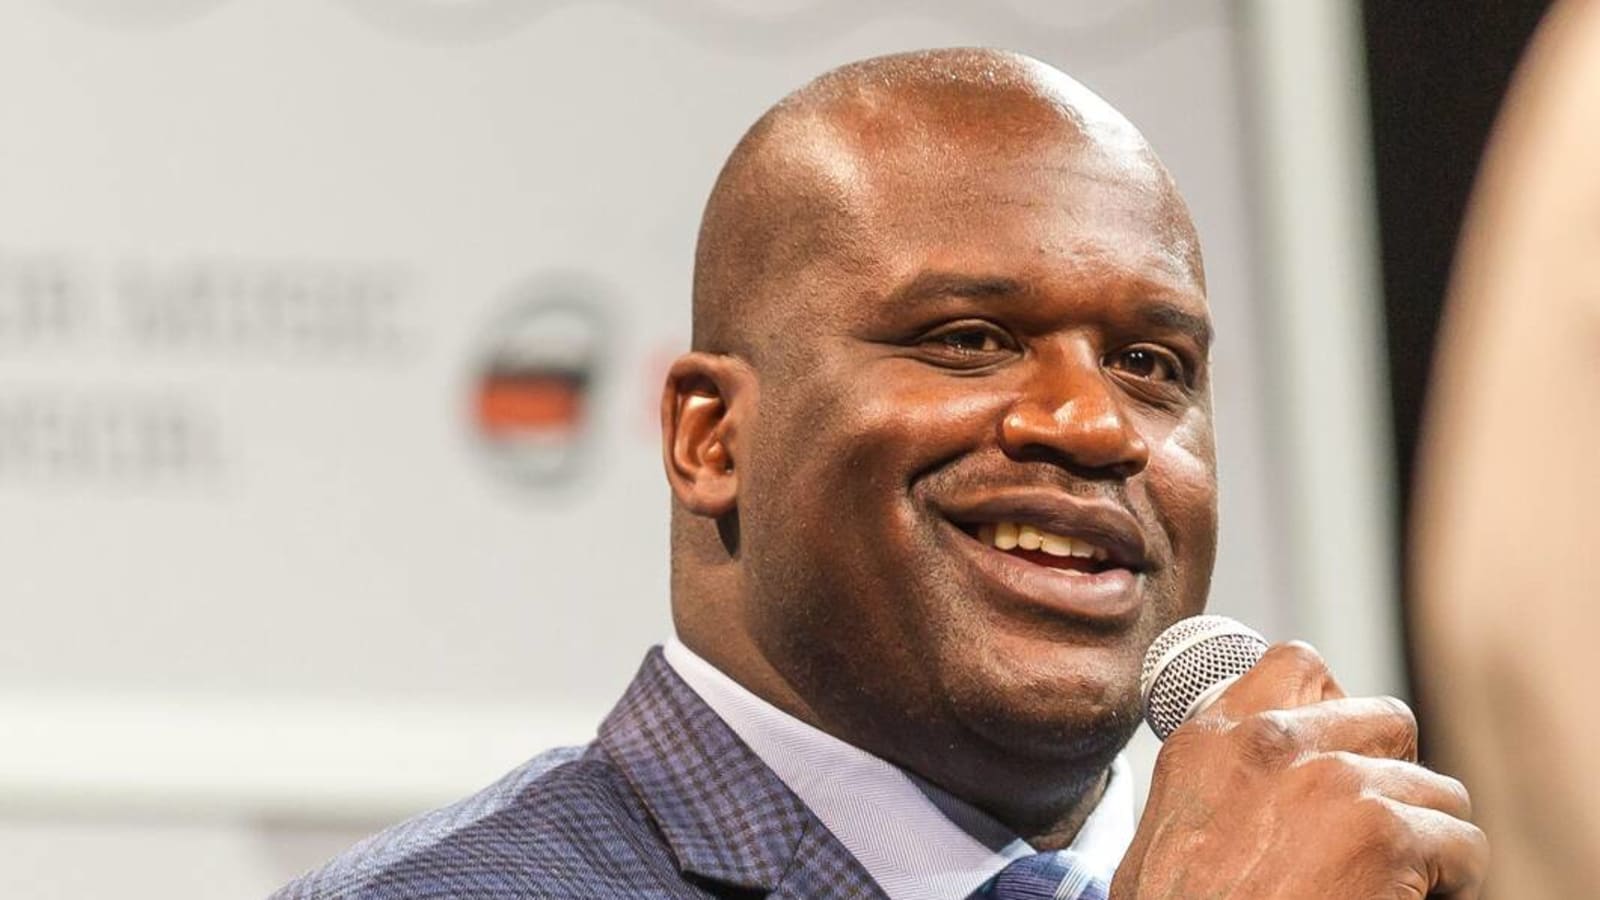 Shaq makes controversial comments to Jokic after MVP announcement